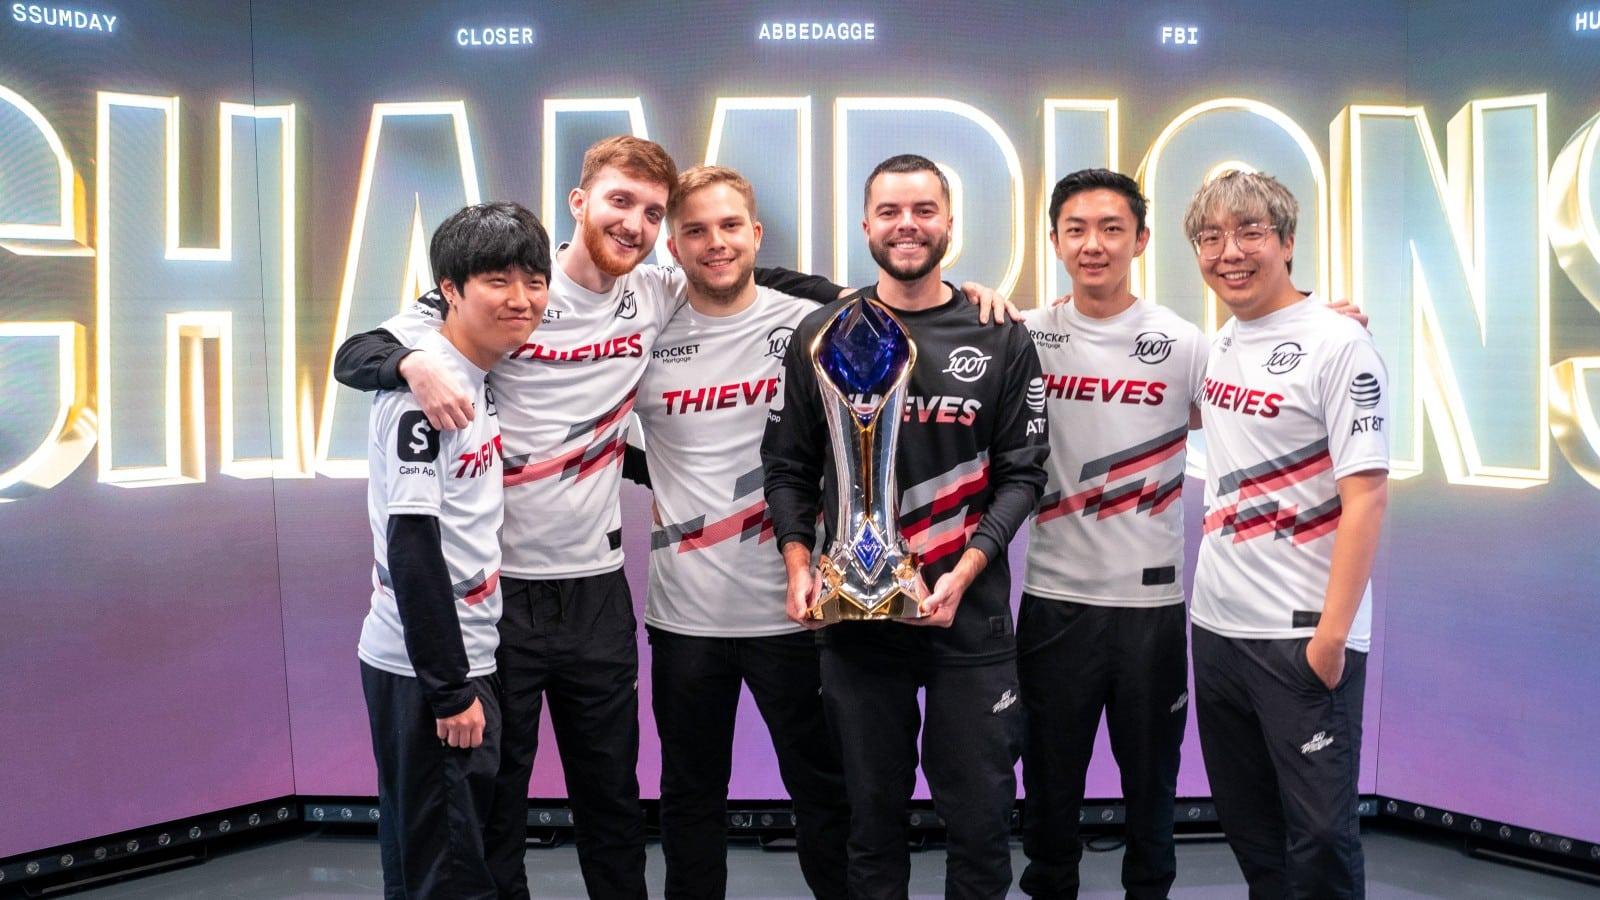 100 Thieves LoL team with CEO Nadeshot